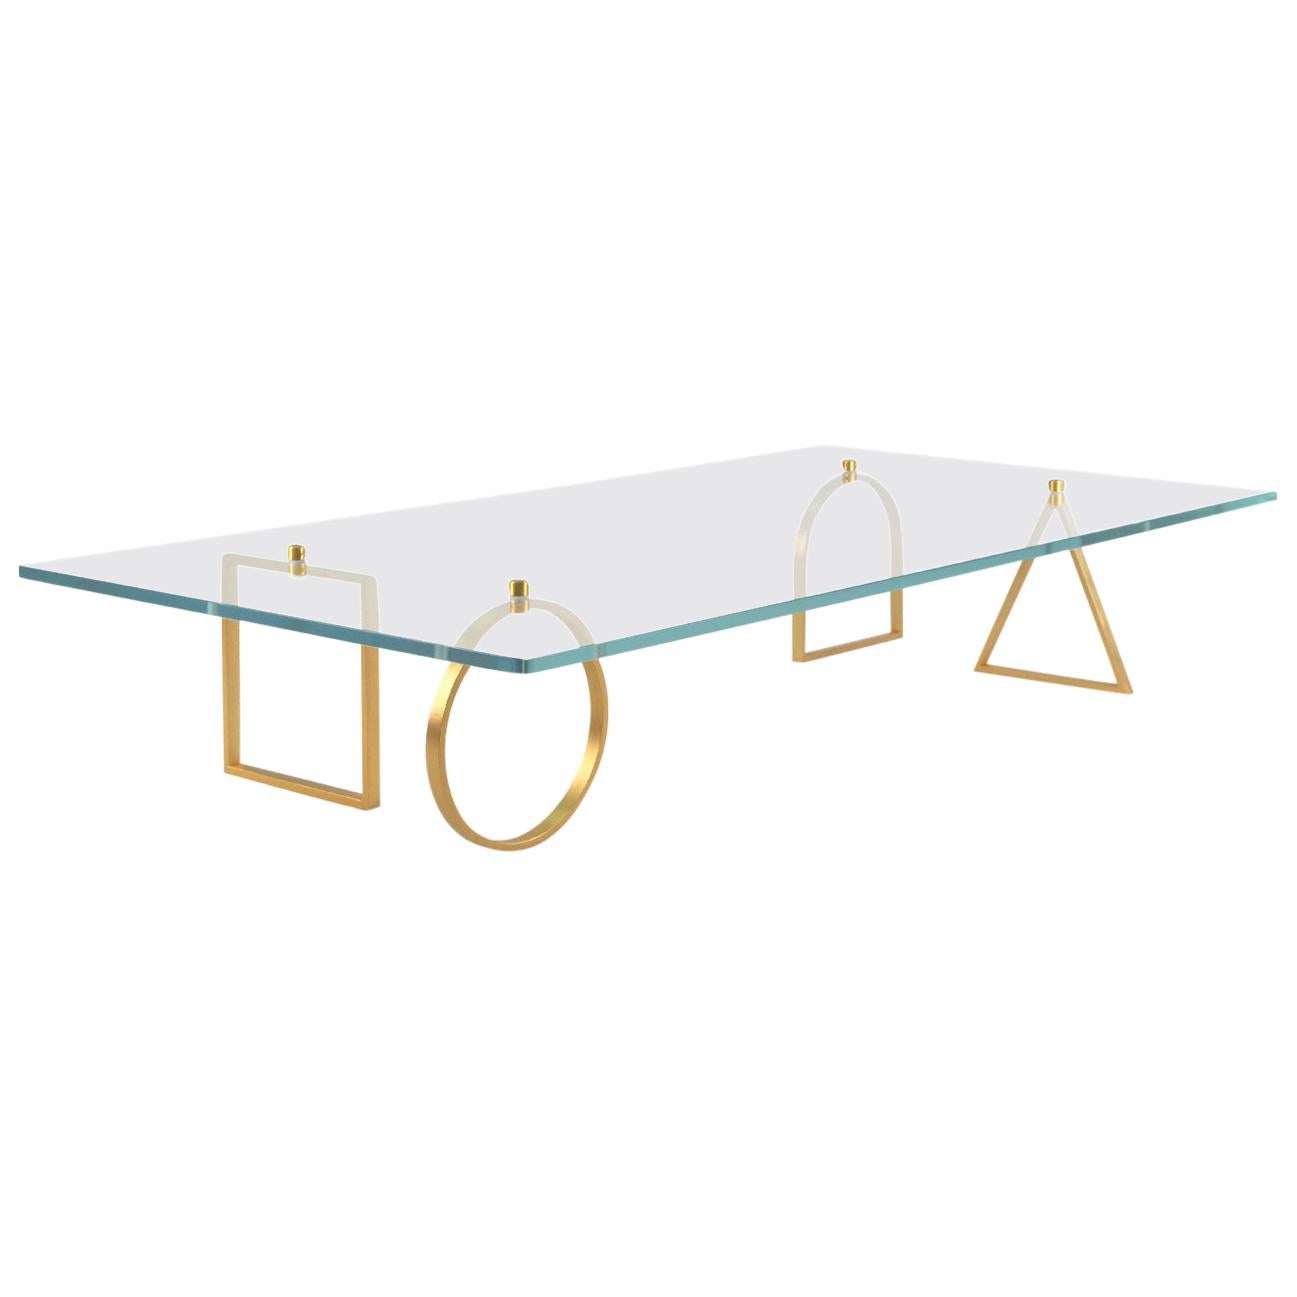 21st Century Bagatto Brass and Glass Contemporary Coffee Table by Ilaria Bianchi